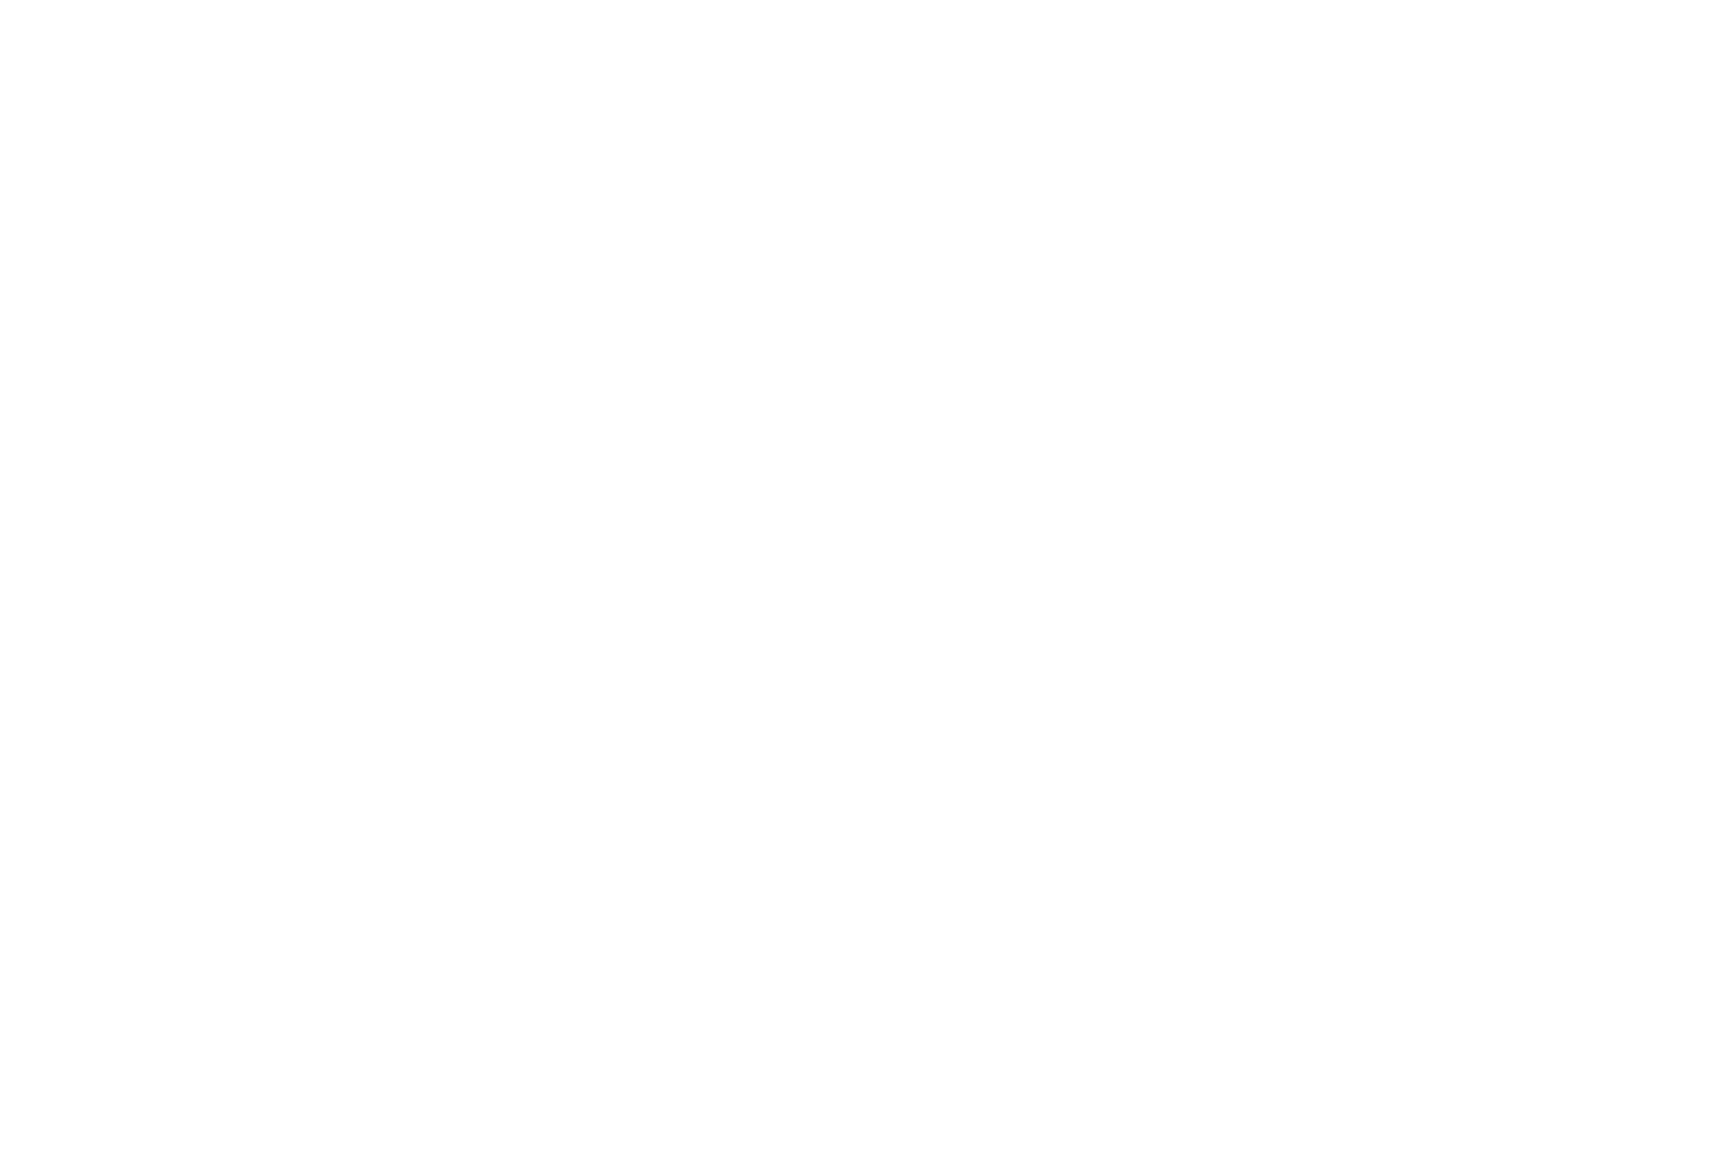 BEST MUSIC VIDEO HONORABLE MENTION - Global Film Festival Awards Los Angeles - 2022